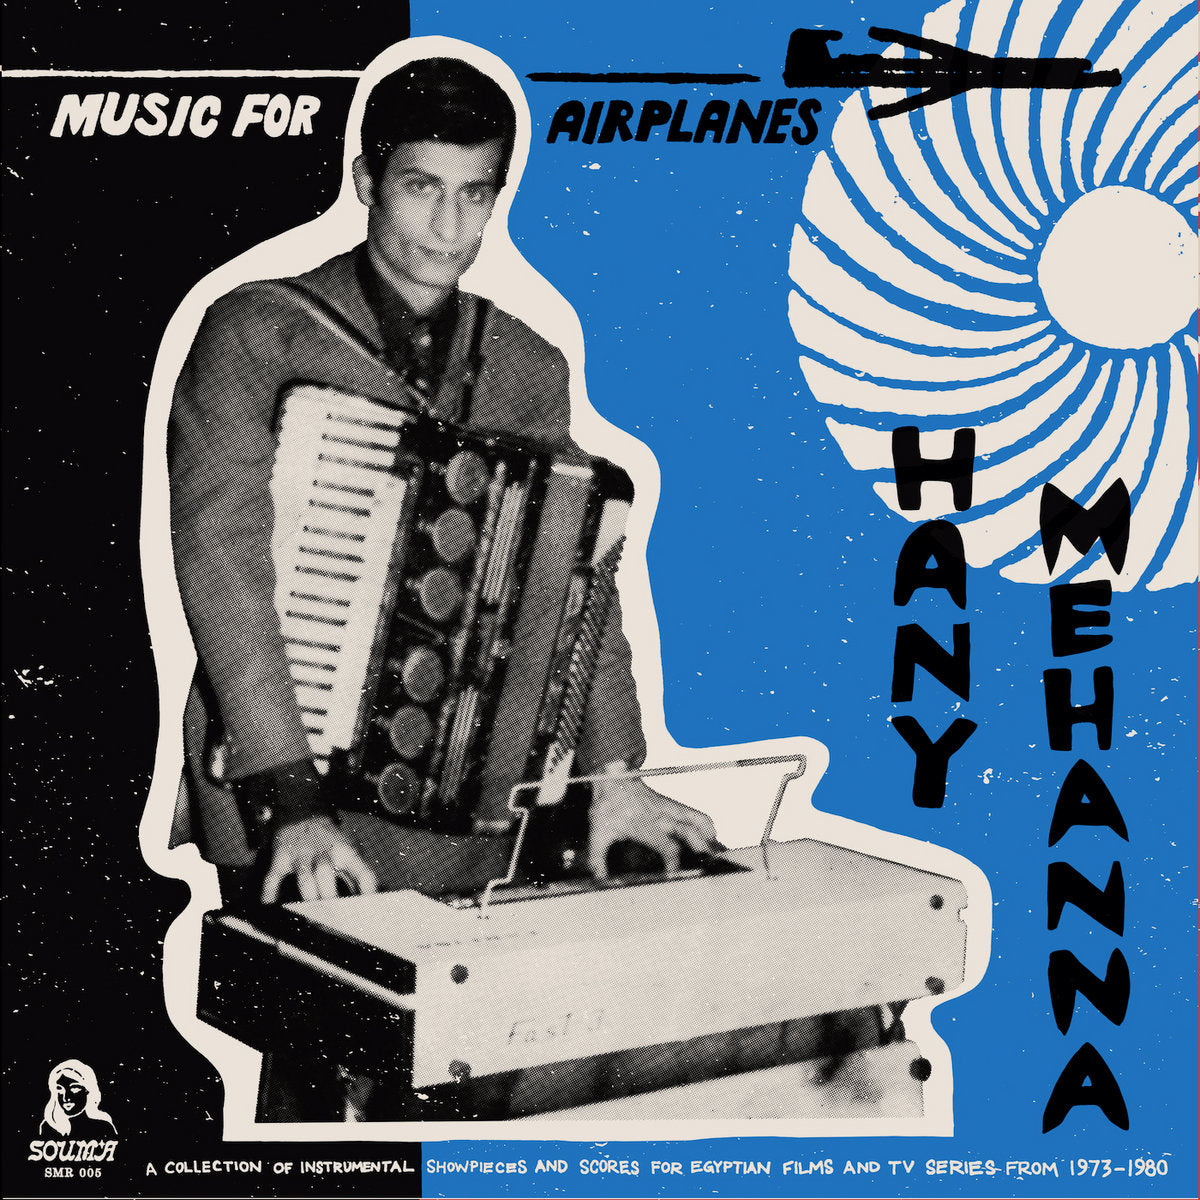 Hany Mehanna - Music For Airplanes - 2LP